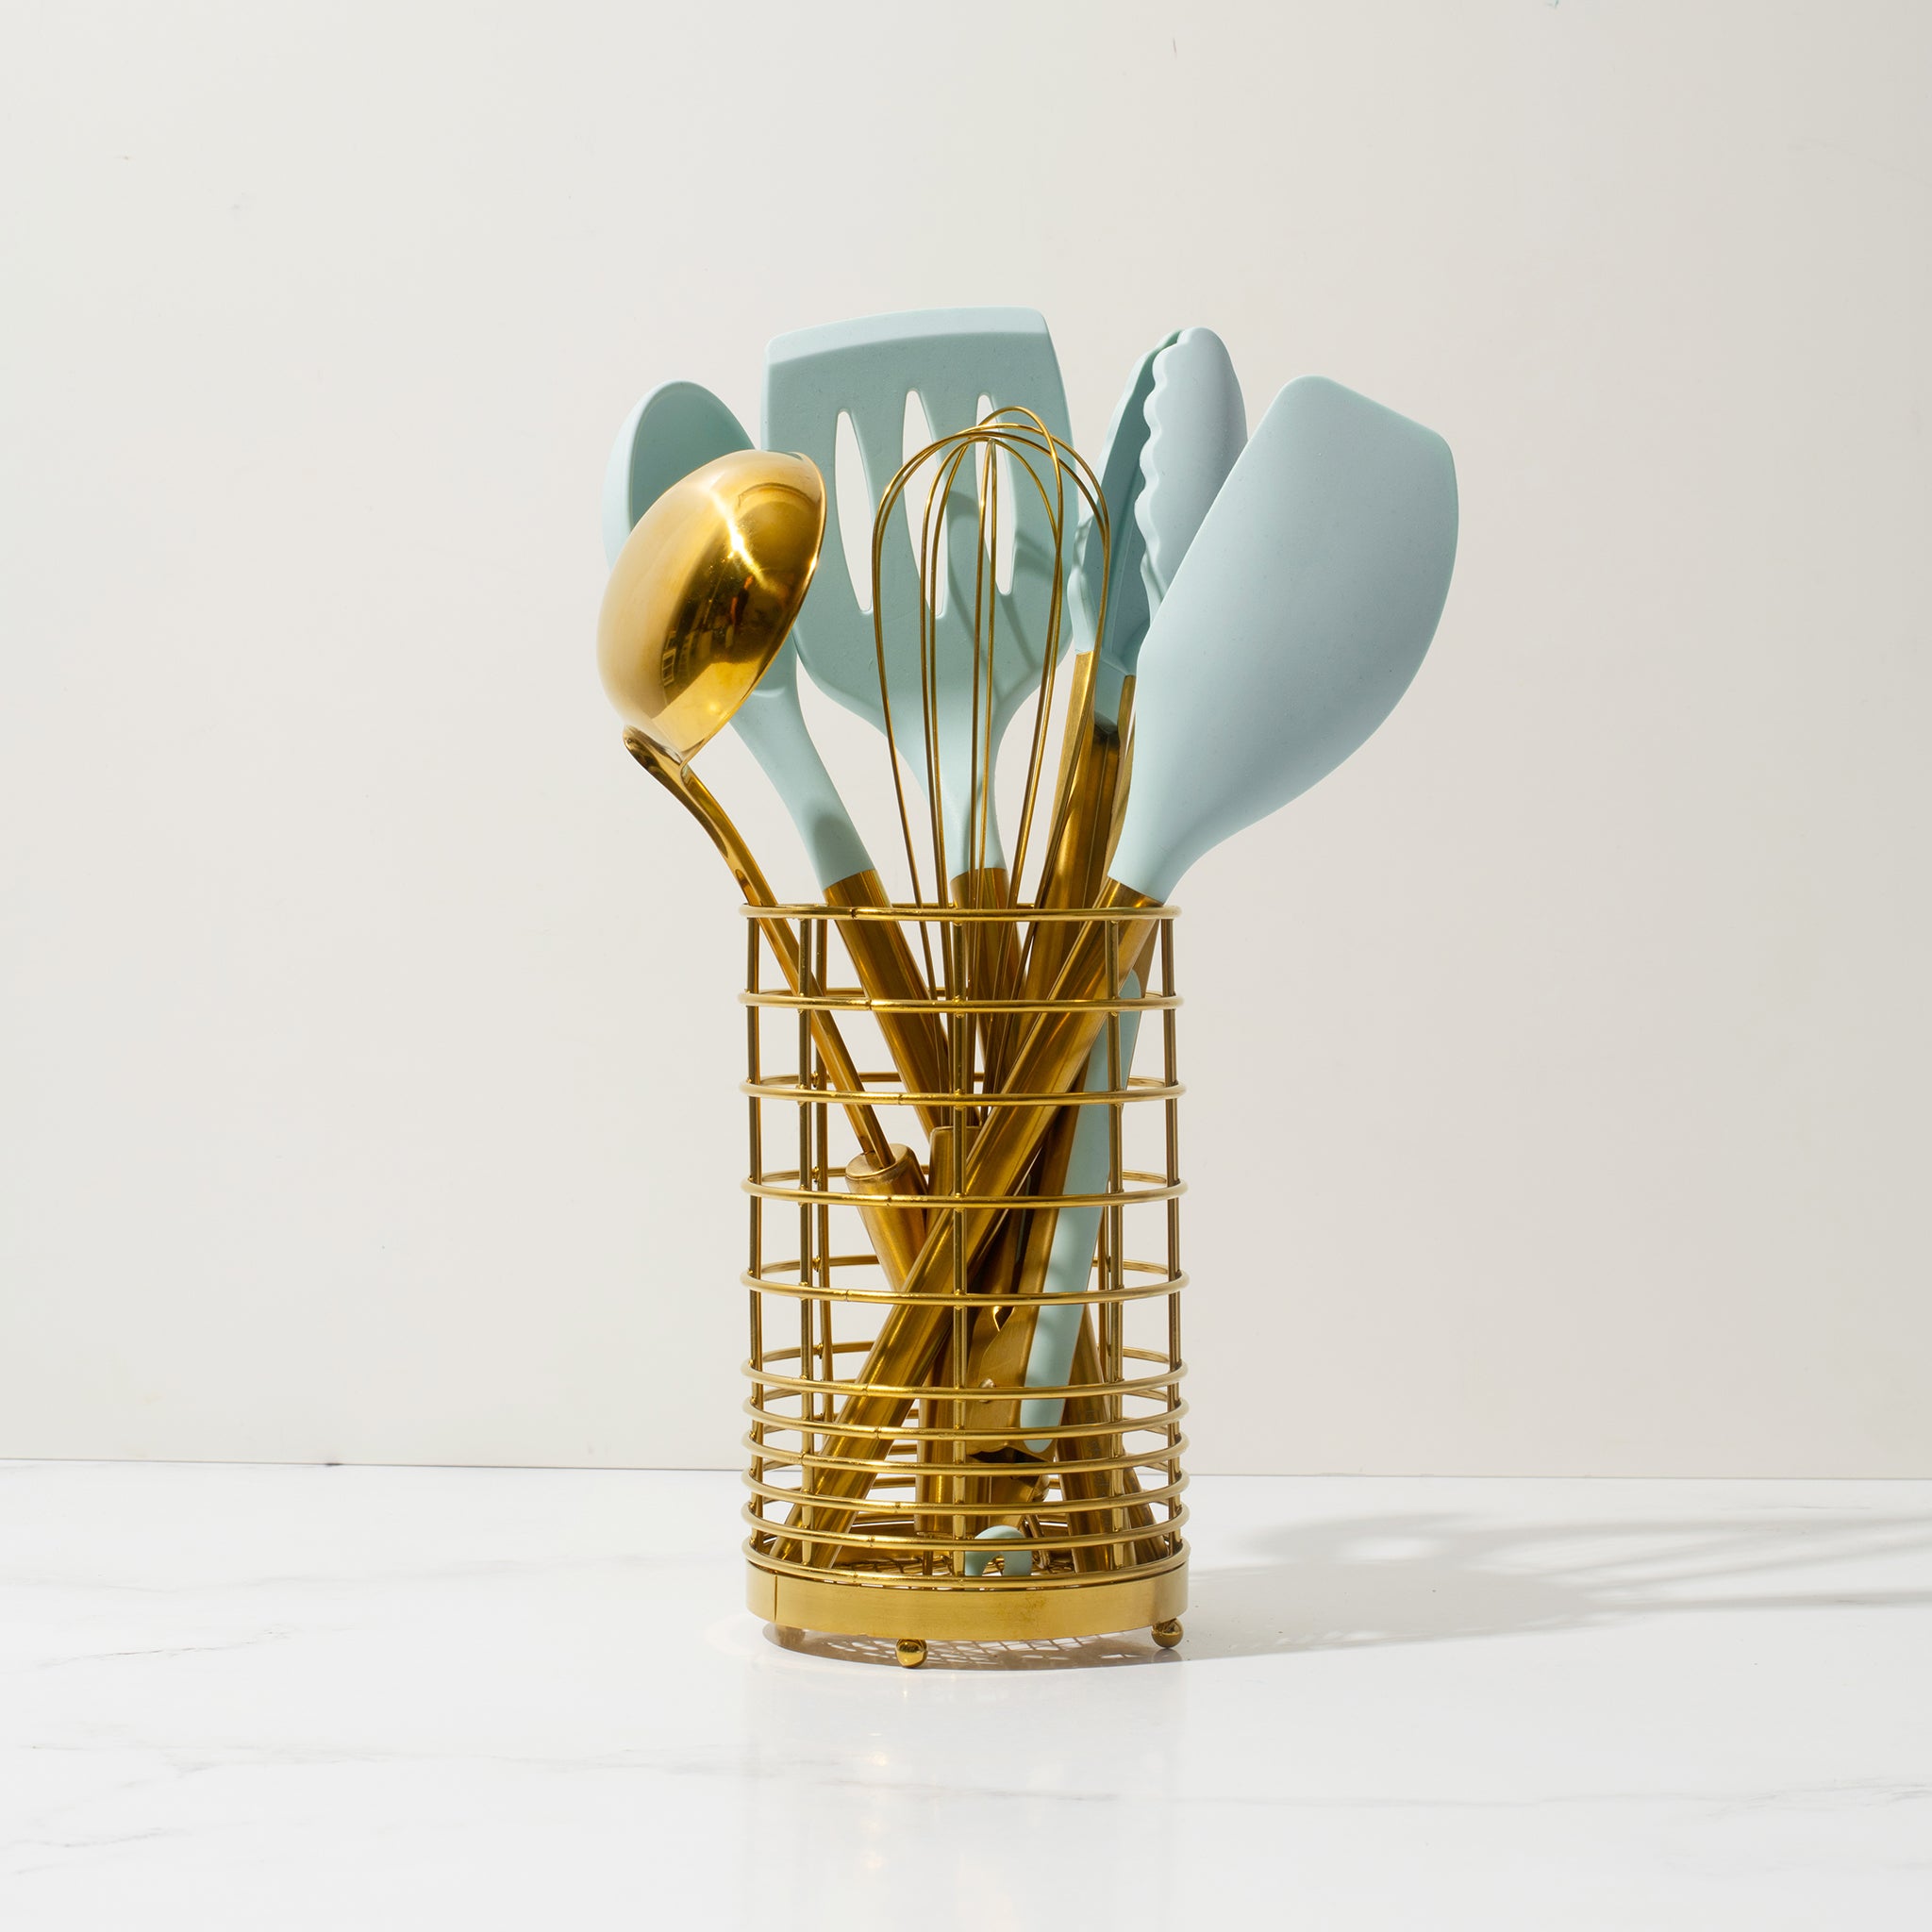 Teal Kitchen Utensils Set with Holder - 17PC Teal & Gold Cooking Utensils  for Nonstick Cookware Includes Gold Utensil Holder - Teal Kitchen